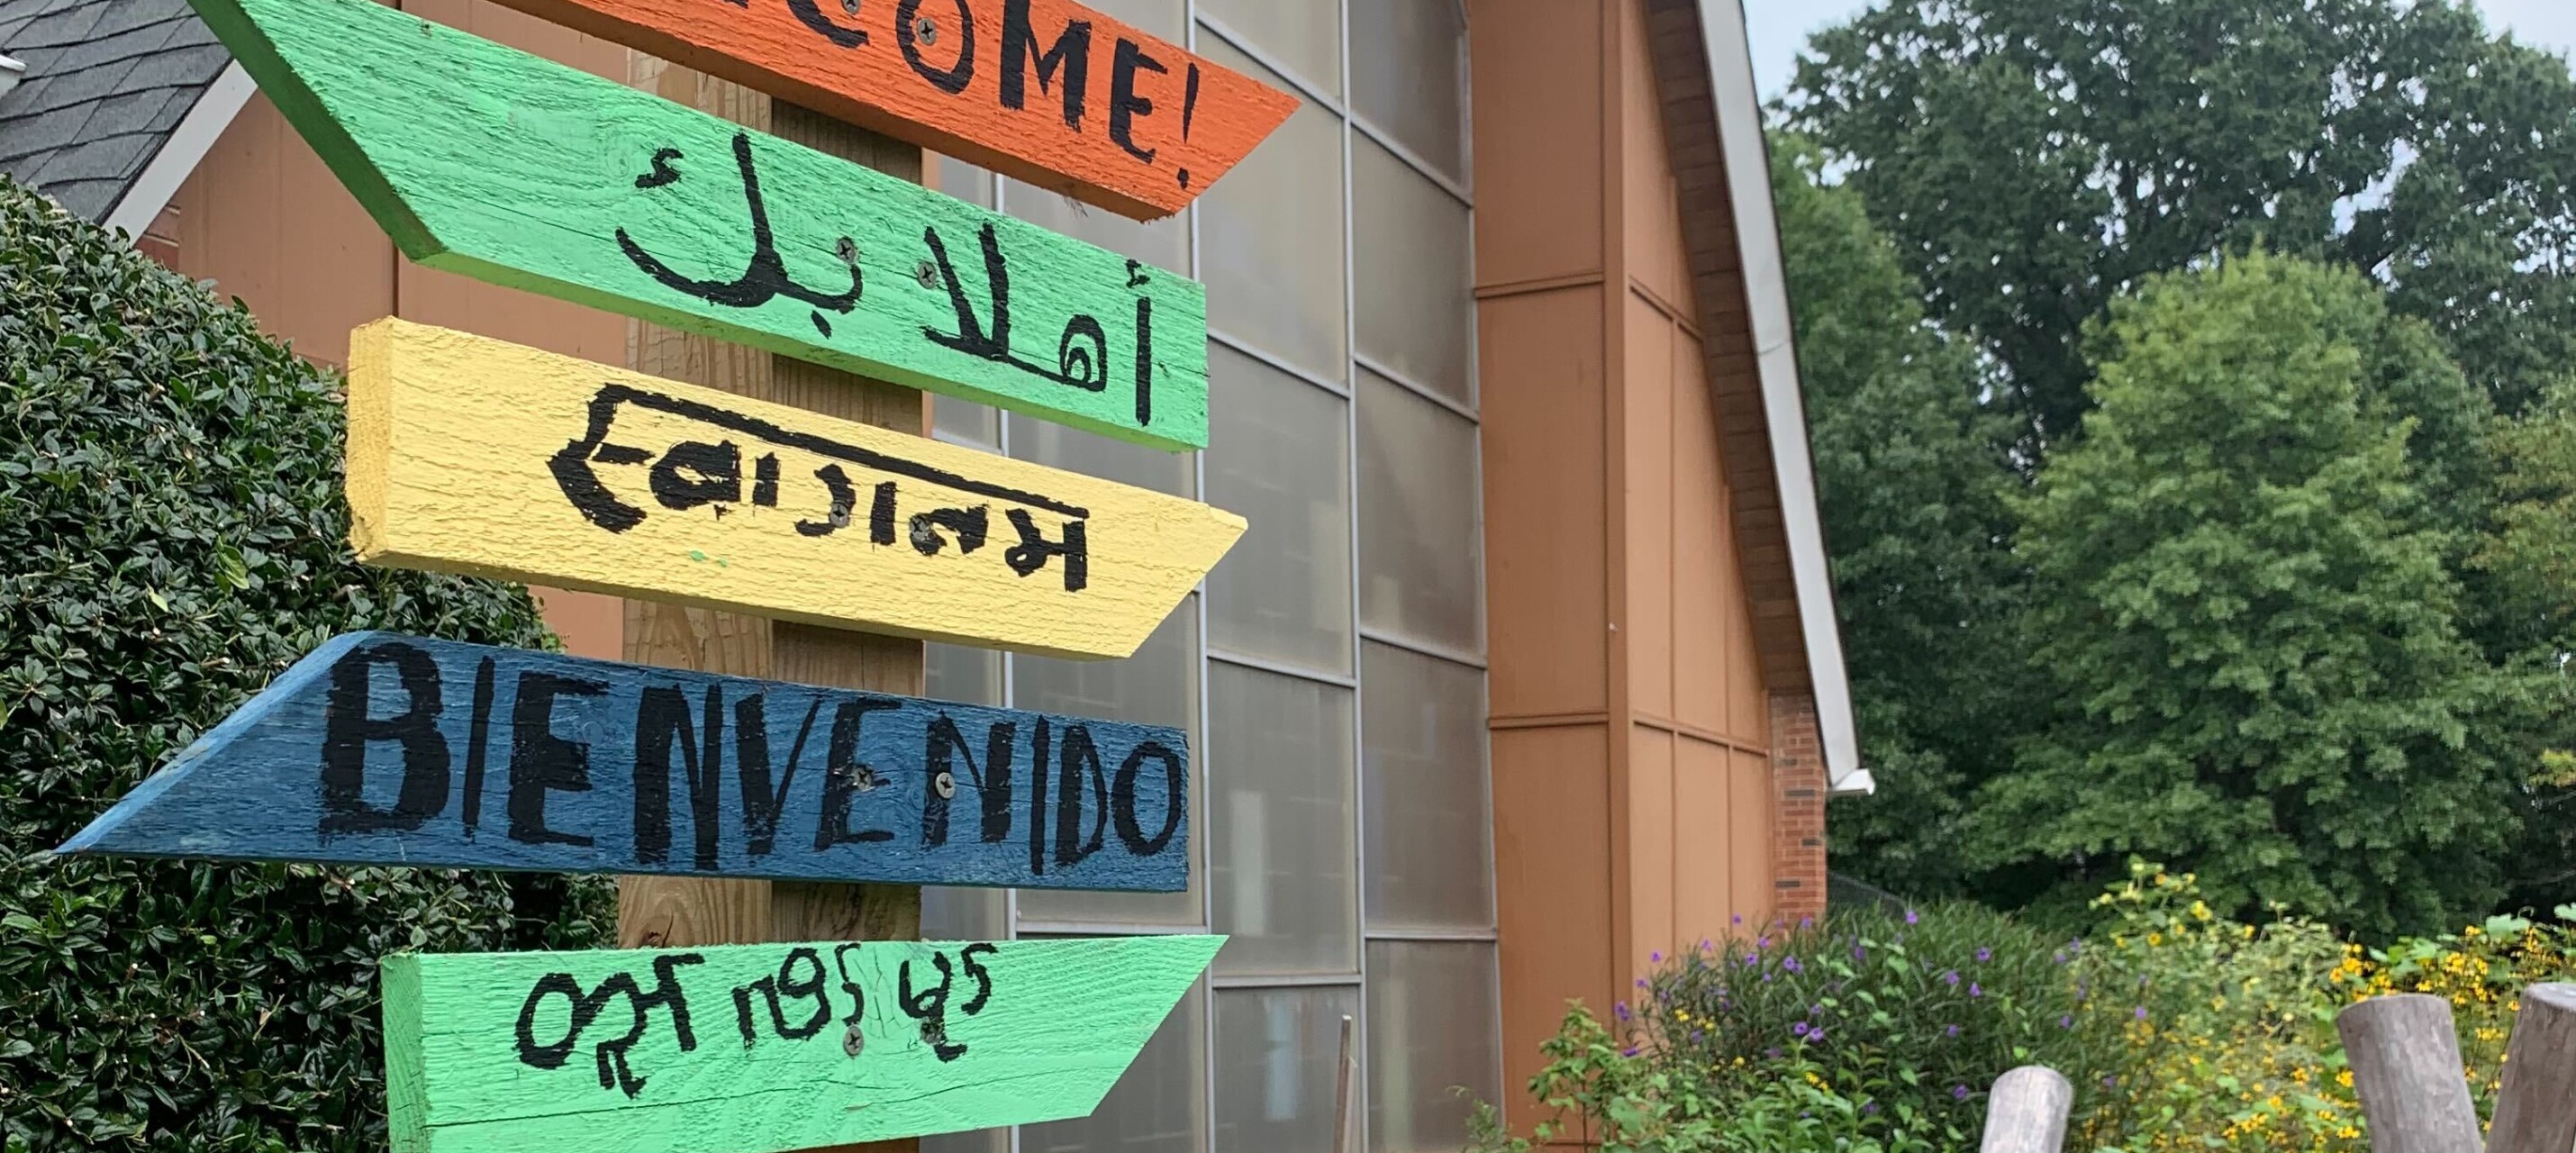 Painted sign that says "Welcome" in several languages